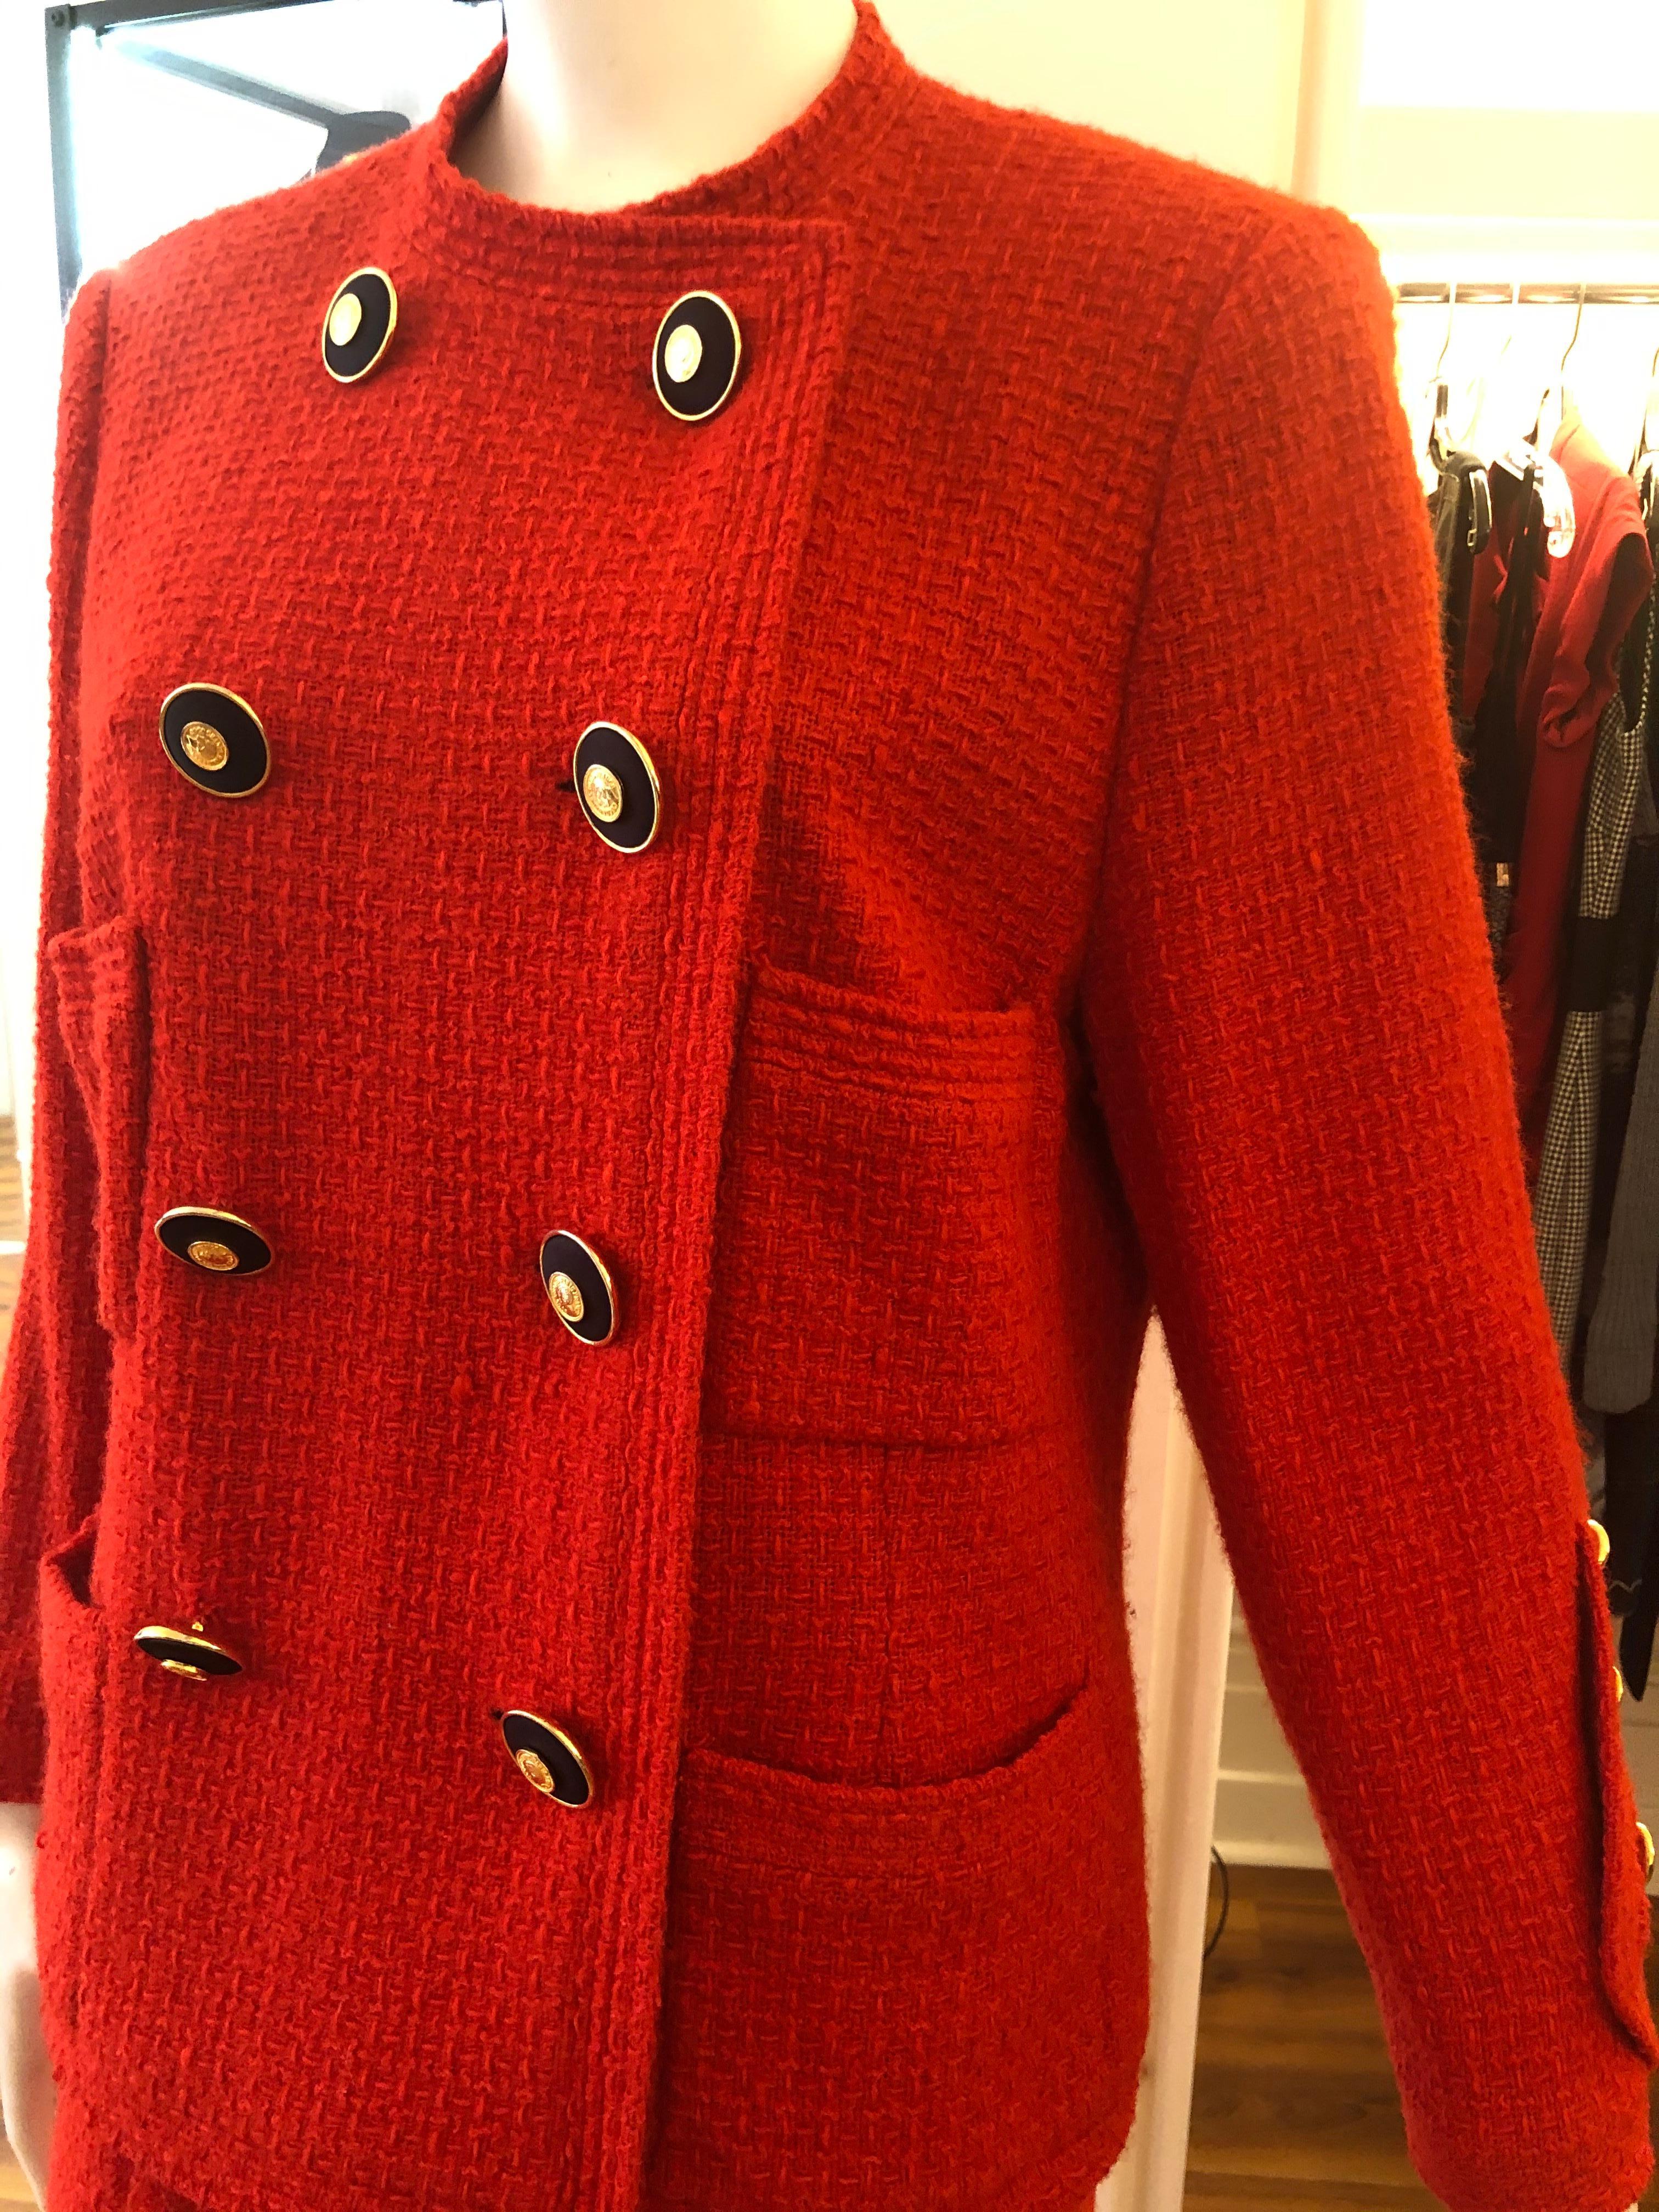 Featured in Emma Baxter-Wright's book Chanel, this red boucle wool suit is from Karl Lagerfeld's first collection for the House of Chanel. The fitted jacket has a double row of gilt buttons, and four pockets, whilst the skirt has a false double